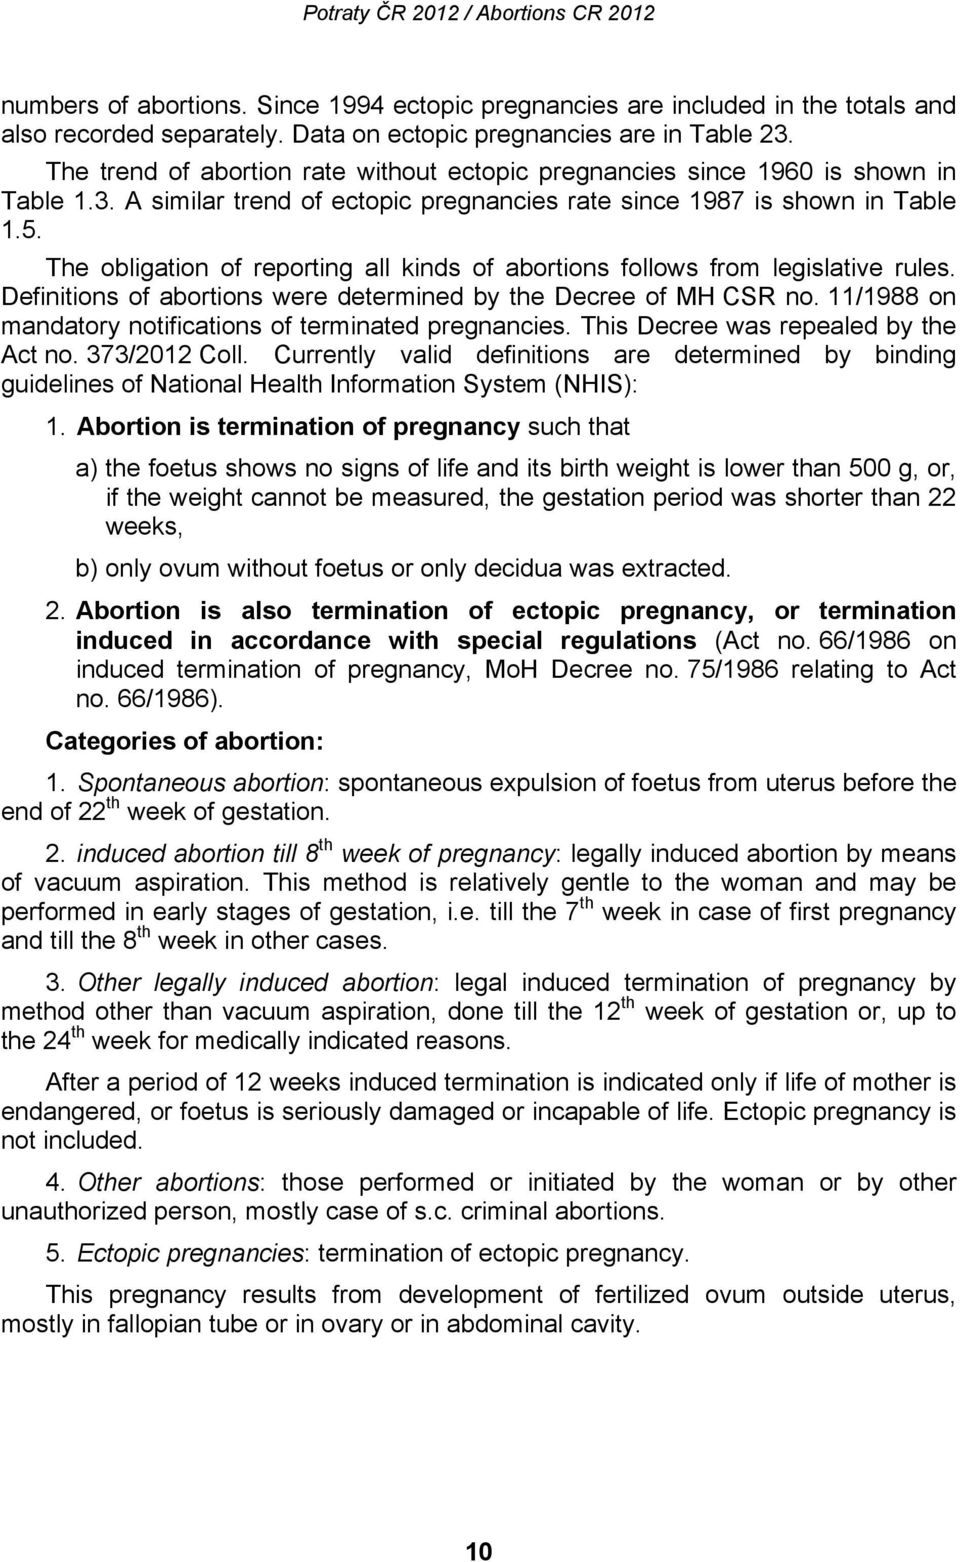 The obligation of reporting all kinds of follows from legislative rules. Definitions of were determined by the Decree of MH CSR no. 11/1988 on mandatory notifications of terminated pregnancies.